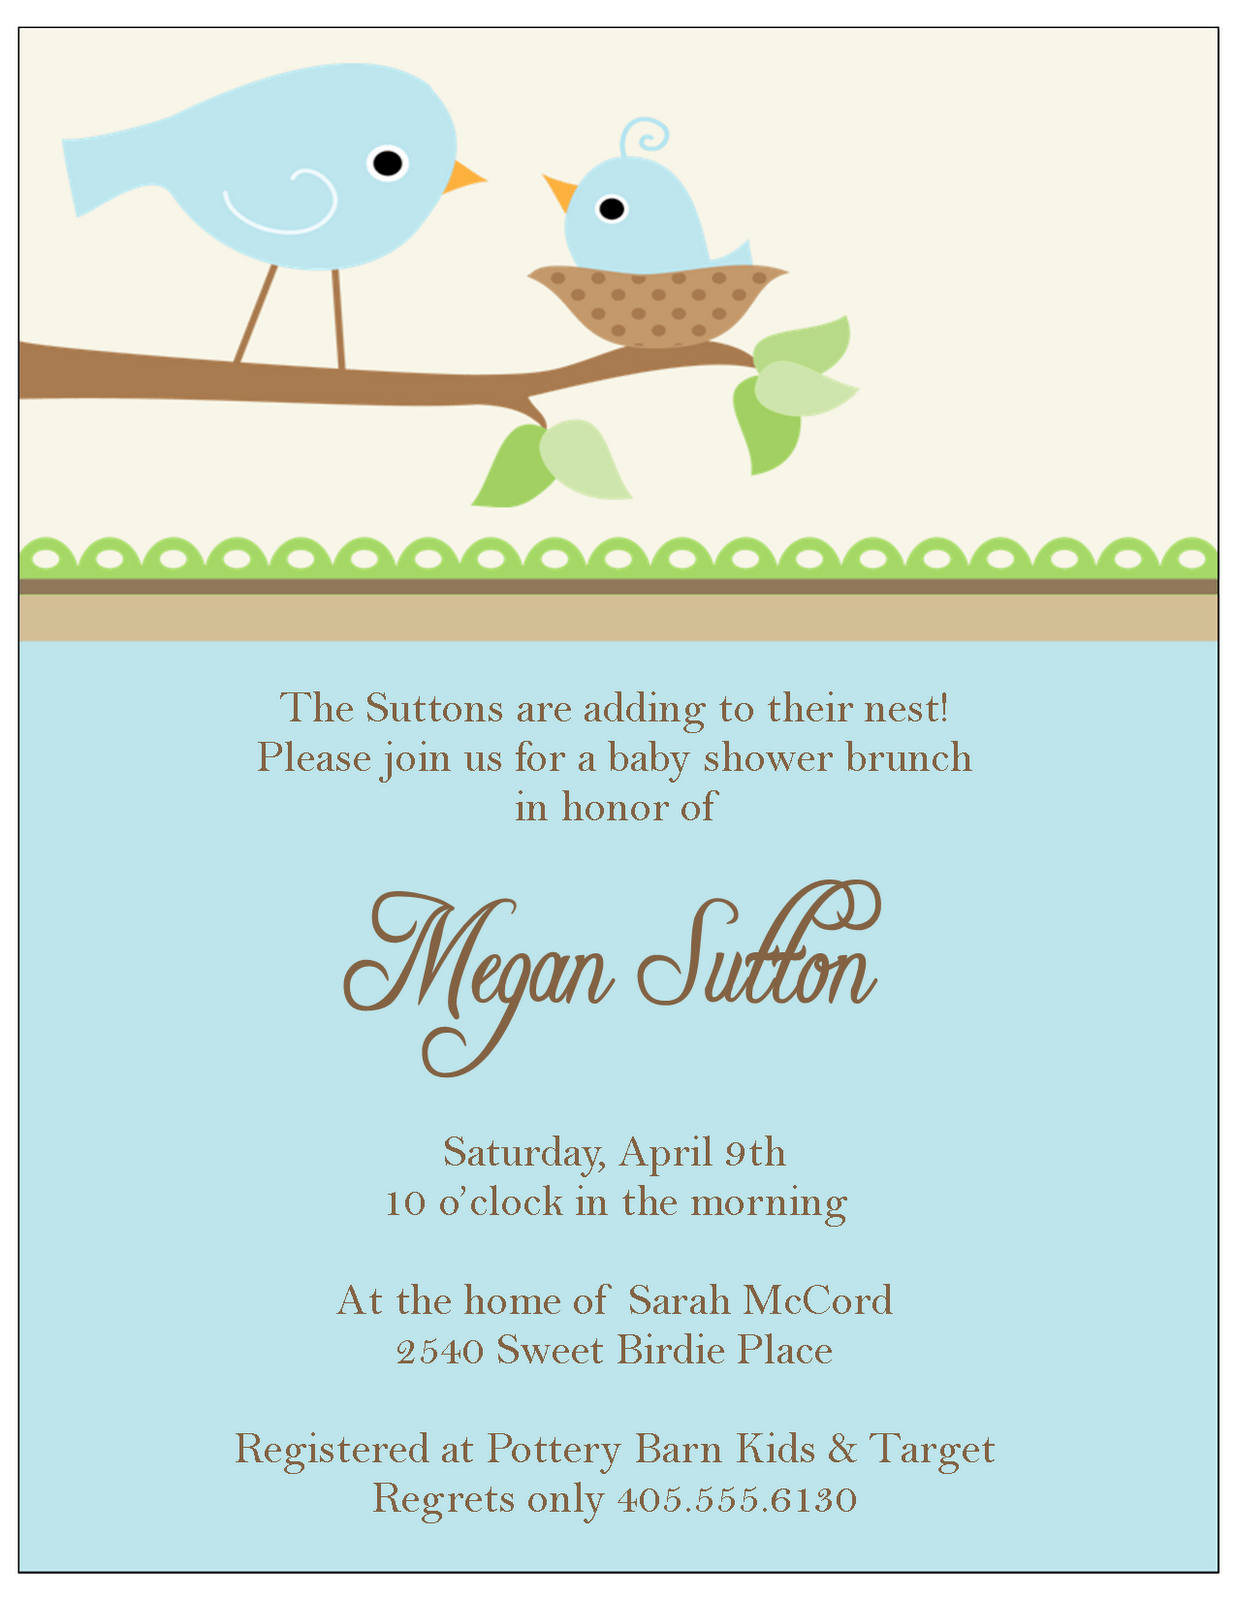 Designs Cute Invitations Baby Shower Creative Baby Shower